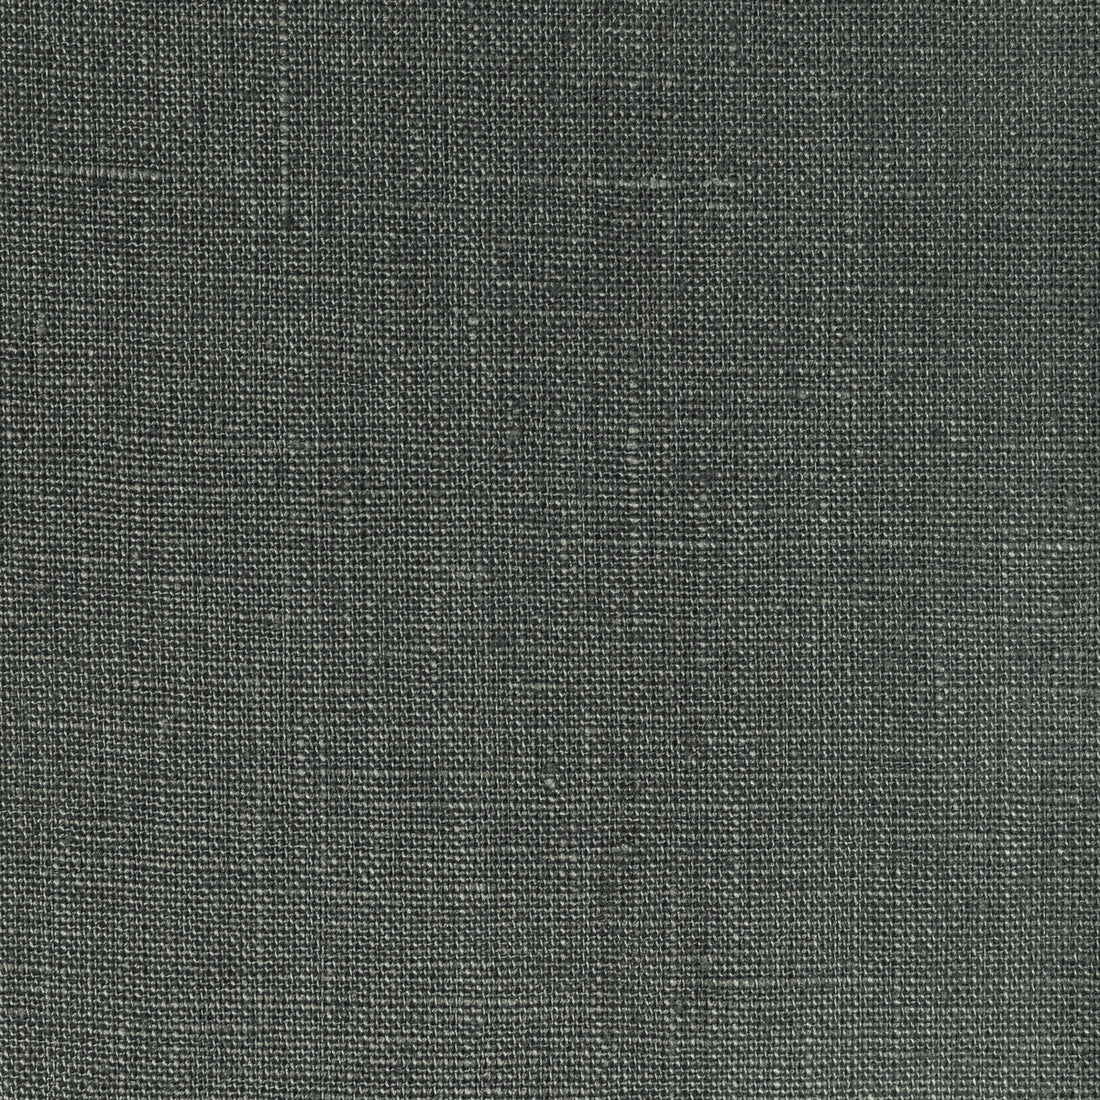 Kravet Basics fabric in 32344-2121 color - pattern 32344.2121.0 - by Kravet Basics in the Perfect Plains collection